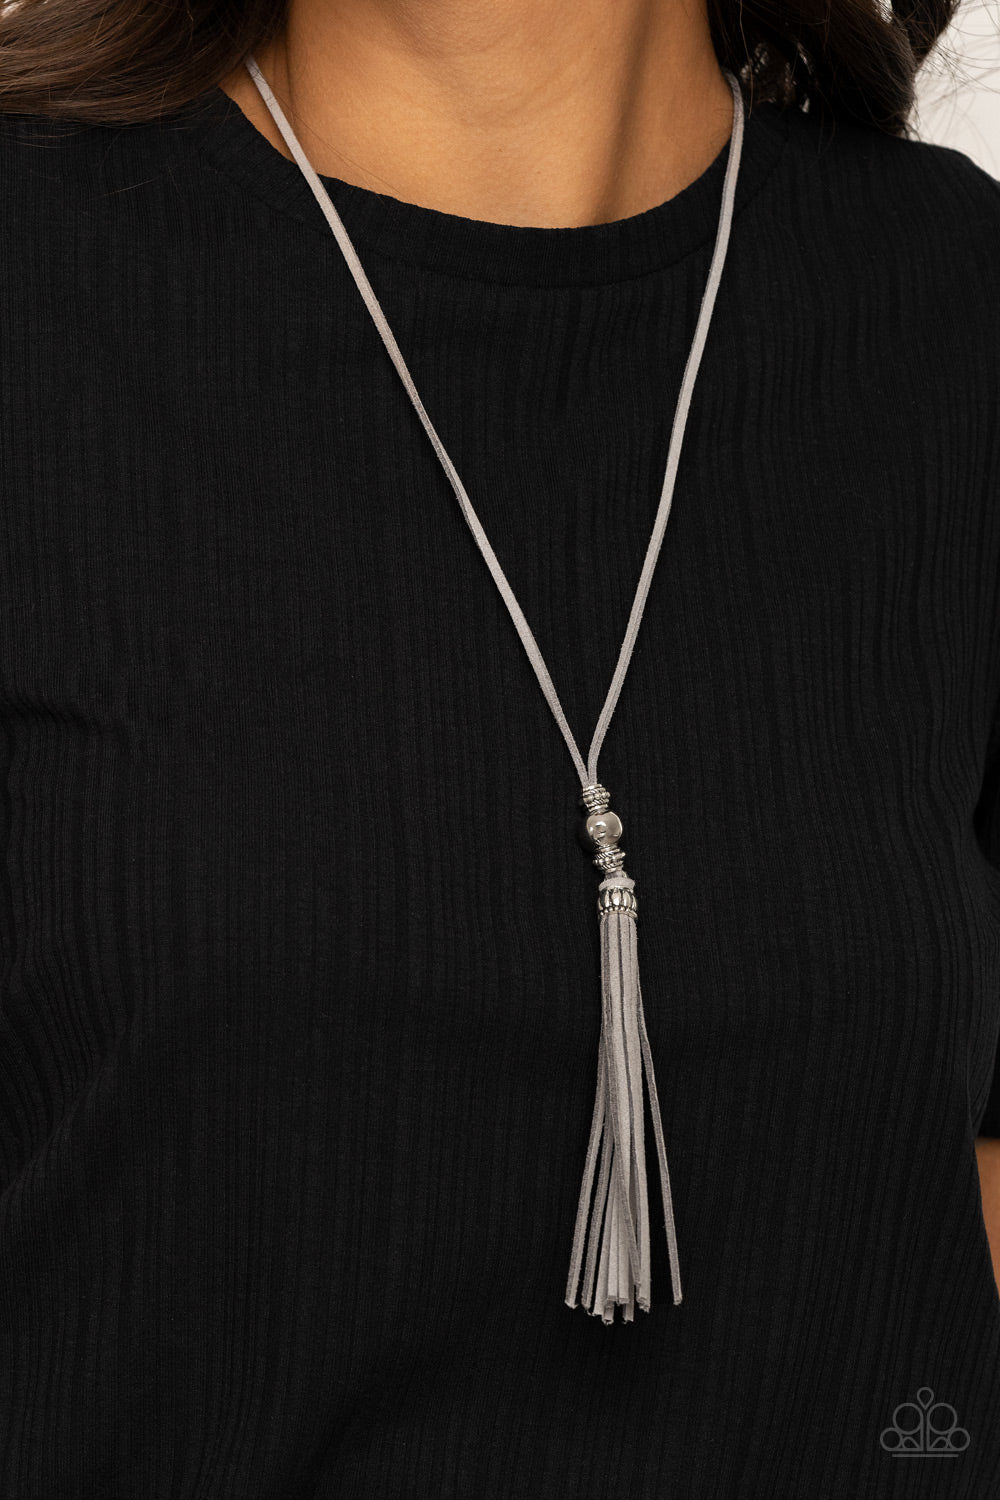 Hold My Tassel - silver - Paparazzi necklace